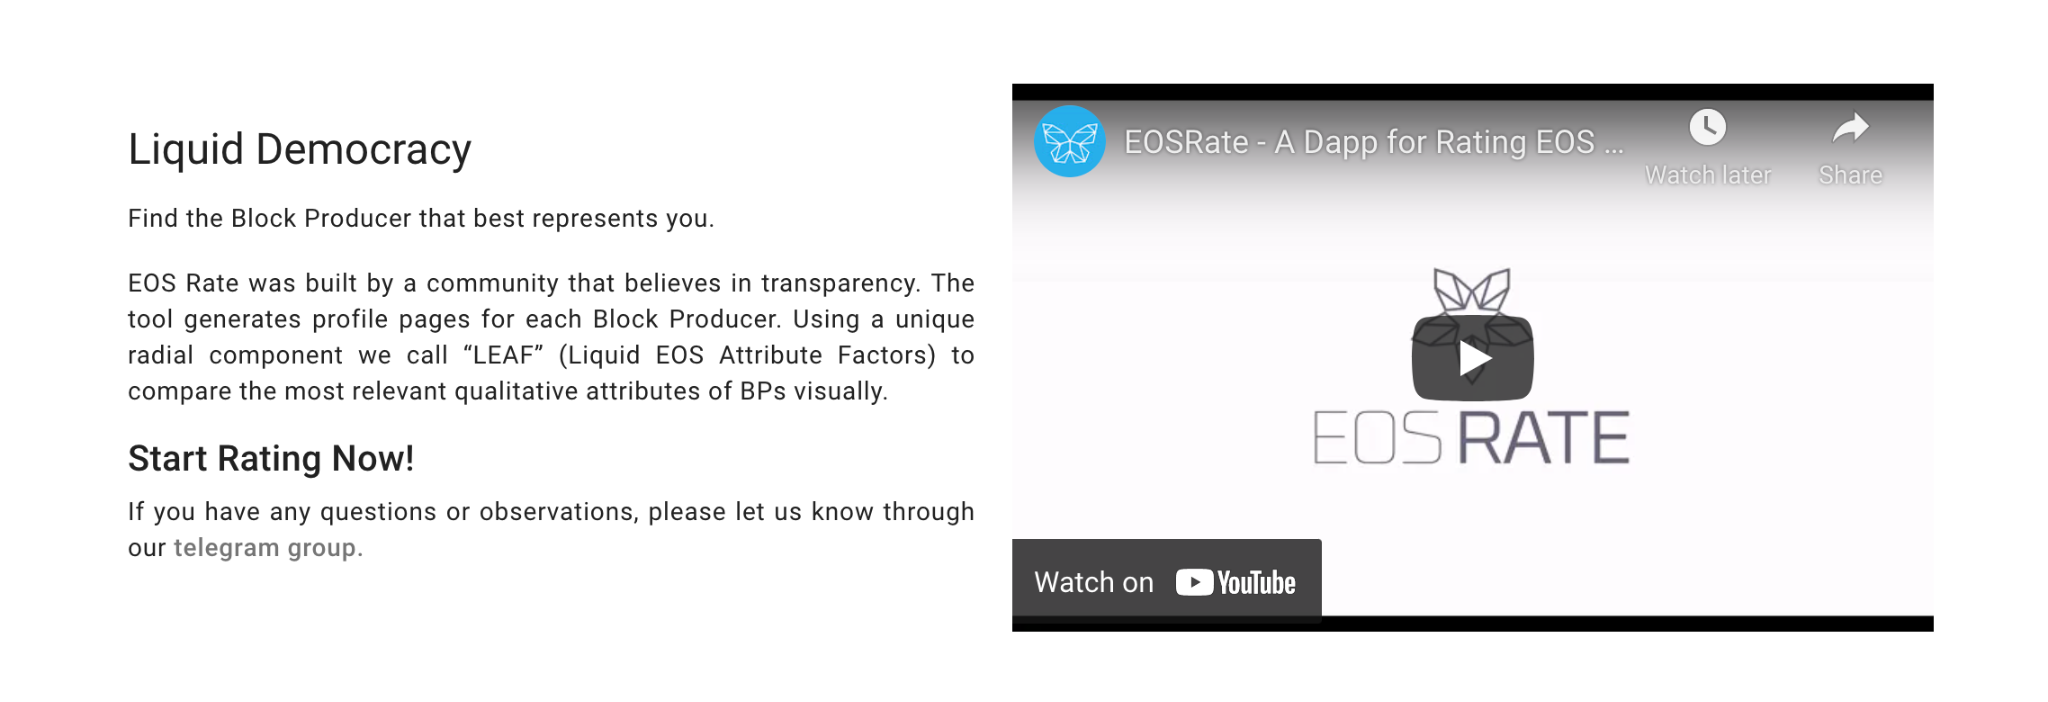 EOS Rate